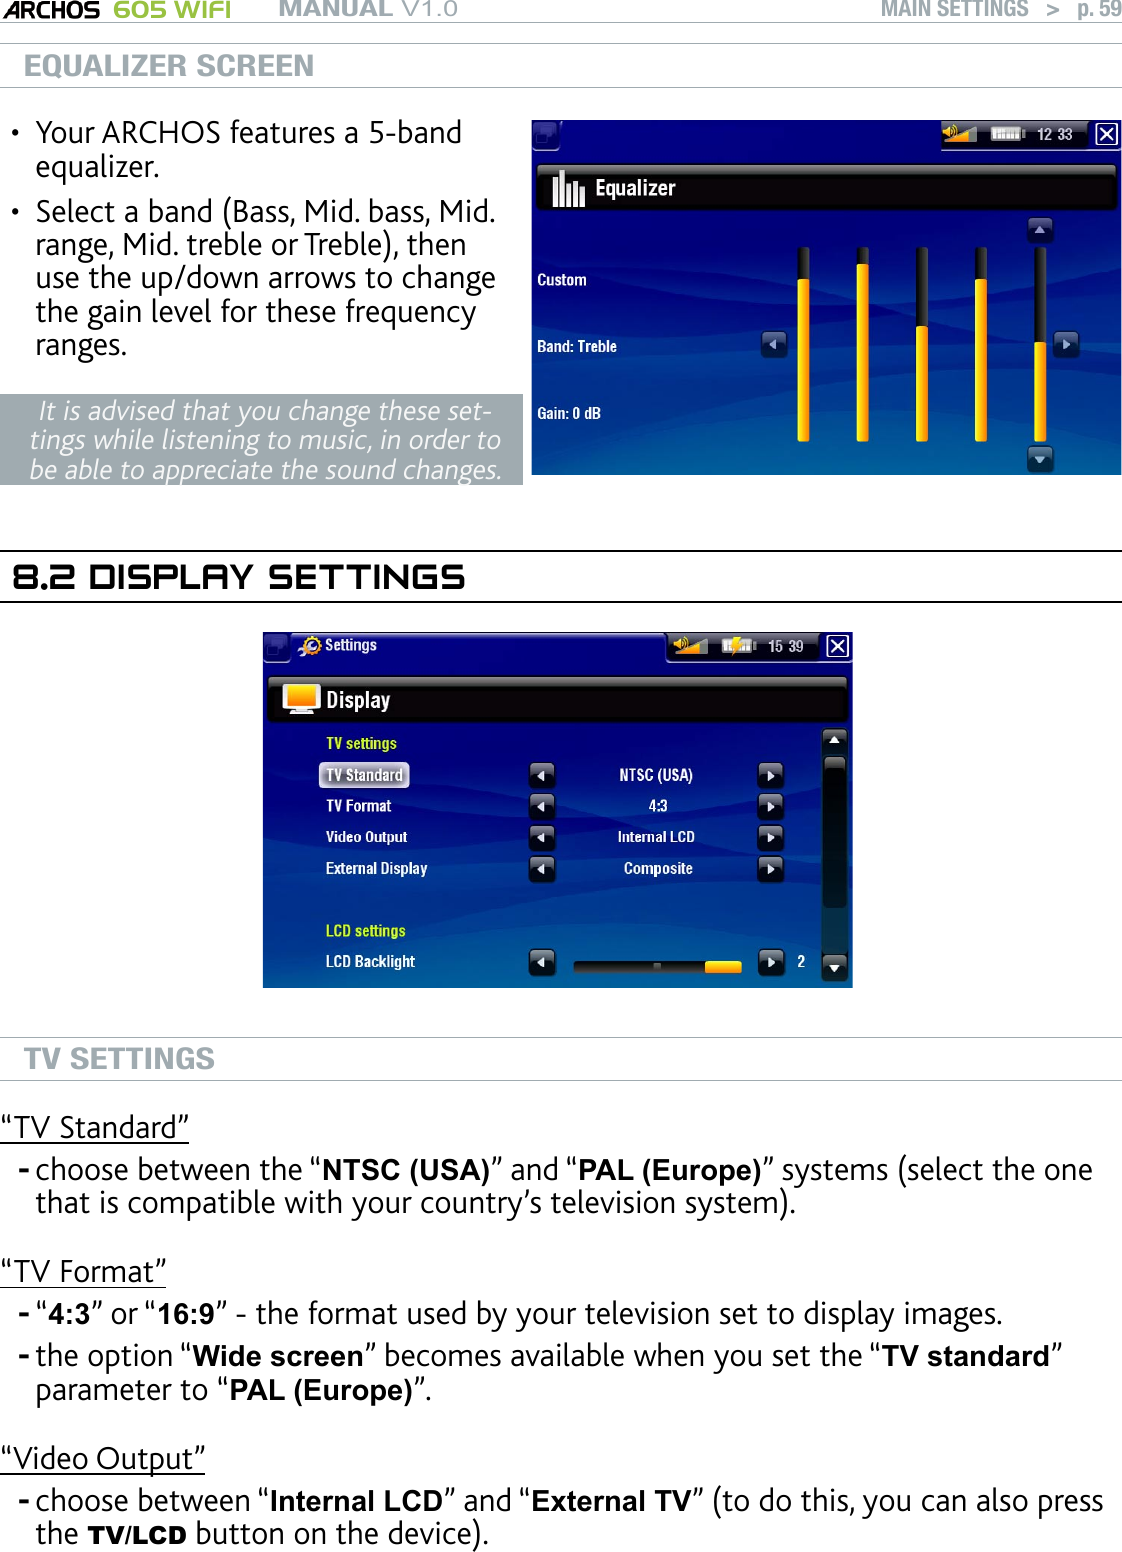 MANUAL V1.0 605 WIFI MAIN SETTINGS   &gt;   p. 59EQUALIZER SCREENYour ARCHOS features a 5-band equalizer.Select a band (Bass, Mid. bass, Mid. range, Mid. treble or Treble), then use the up/down arrows to change the gain level for these frequency ranges.••It is advised that you change these set-tings while listening to music, in order to be able to appreciate the sound changes.8.2 DISPLAY SETTINGSTV SETTINGS“TV Standard”choose between the “NTSC (USA)” and “PAL (Europe)” systems (select the one that is compatible with your country’s television system).“TV Format”“4:3” or “16:9” - the format used by your television set to display images. the option “Wide screen” becomes available when you set the “TV standard” parameter to “PAL (Europe)”.“Video Output”choose between “Internal LCD” and “External TV” (to do this, you can also press the TV/LCD button on the device).----